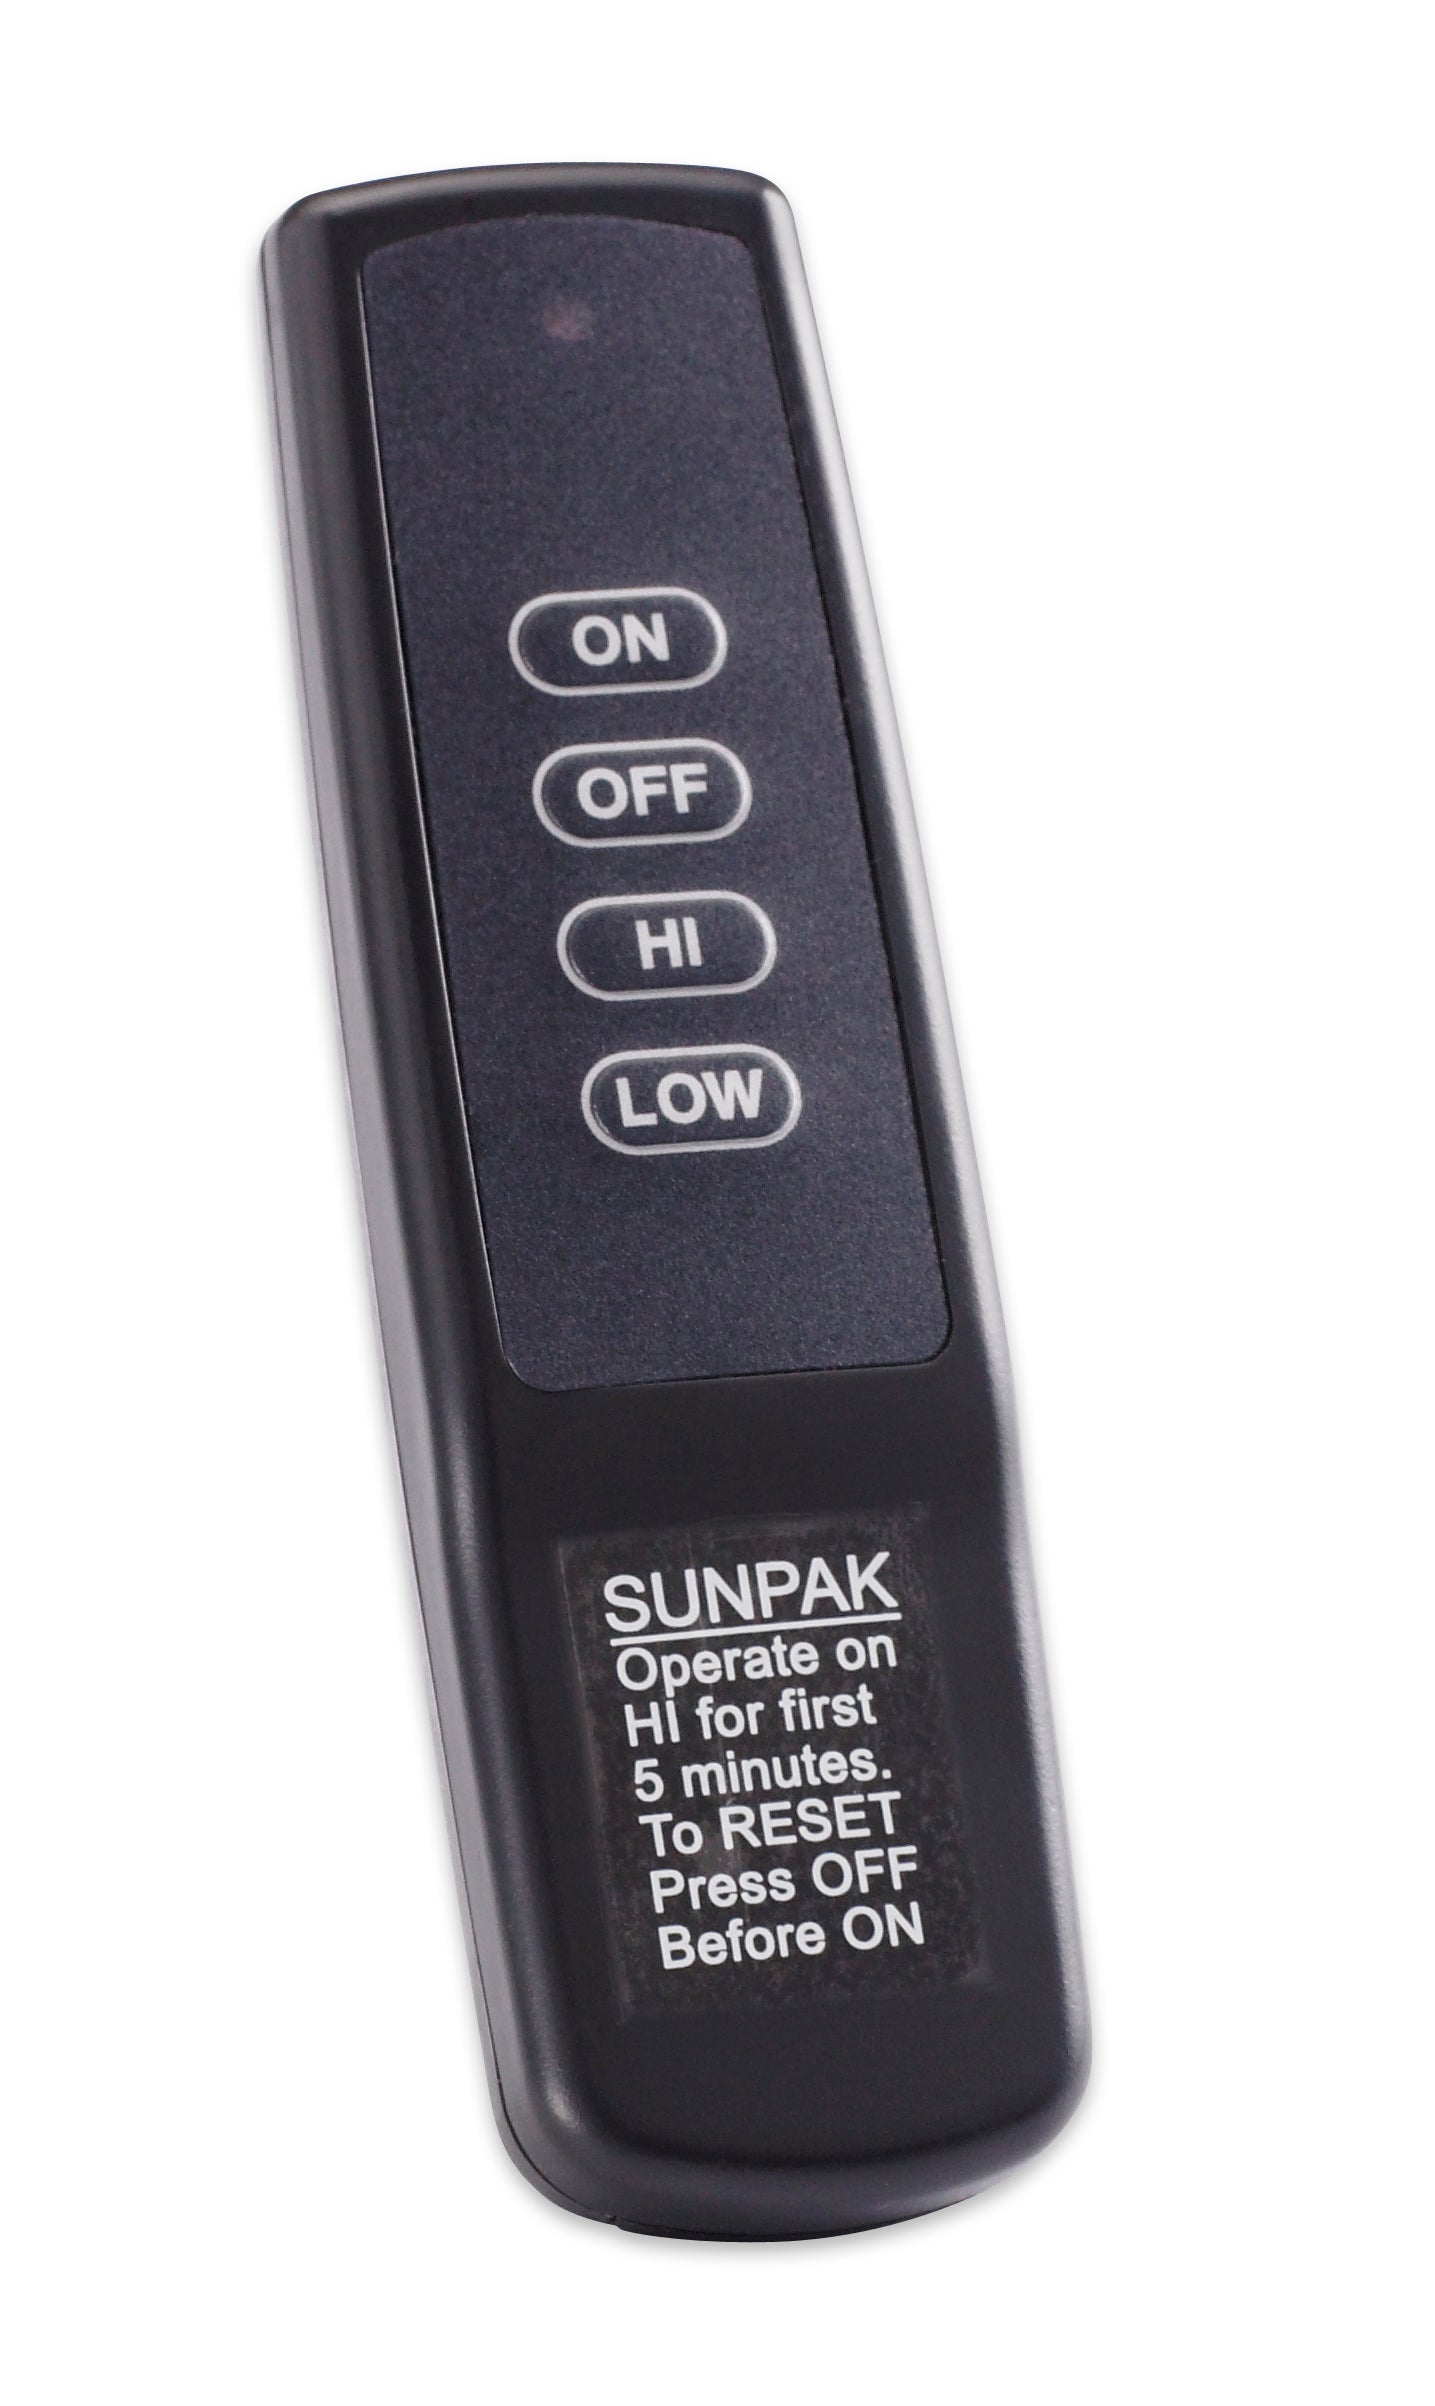 Sunpak Two Stage Infrared Patio Heater Electric Ignition -S34 TSR Stainless Steel- Remote